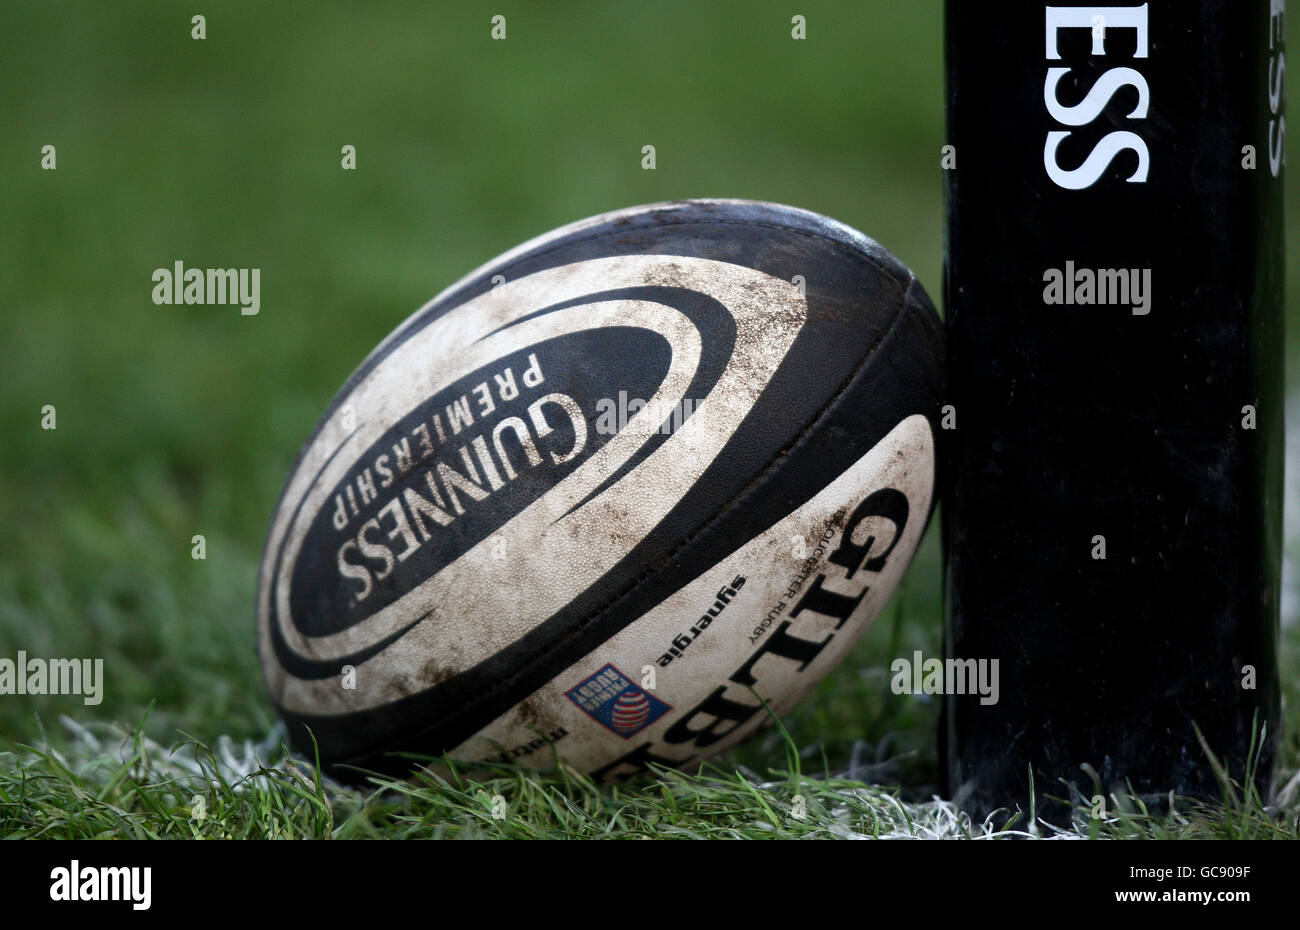 Rugby Union - Guinness Premiership - Gloucester v Worcester Warriors - Kingsholm. General view of a Guinness Premiership Official matchball leaning up against a Guinness branded corner flag Stock Photo